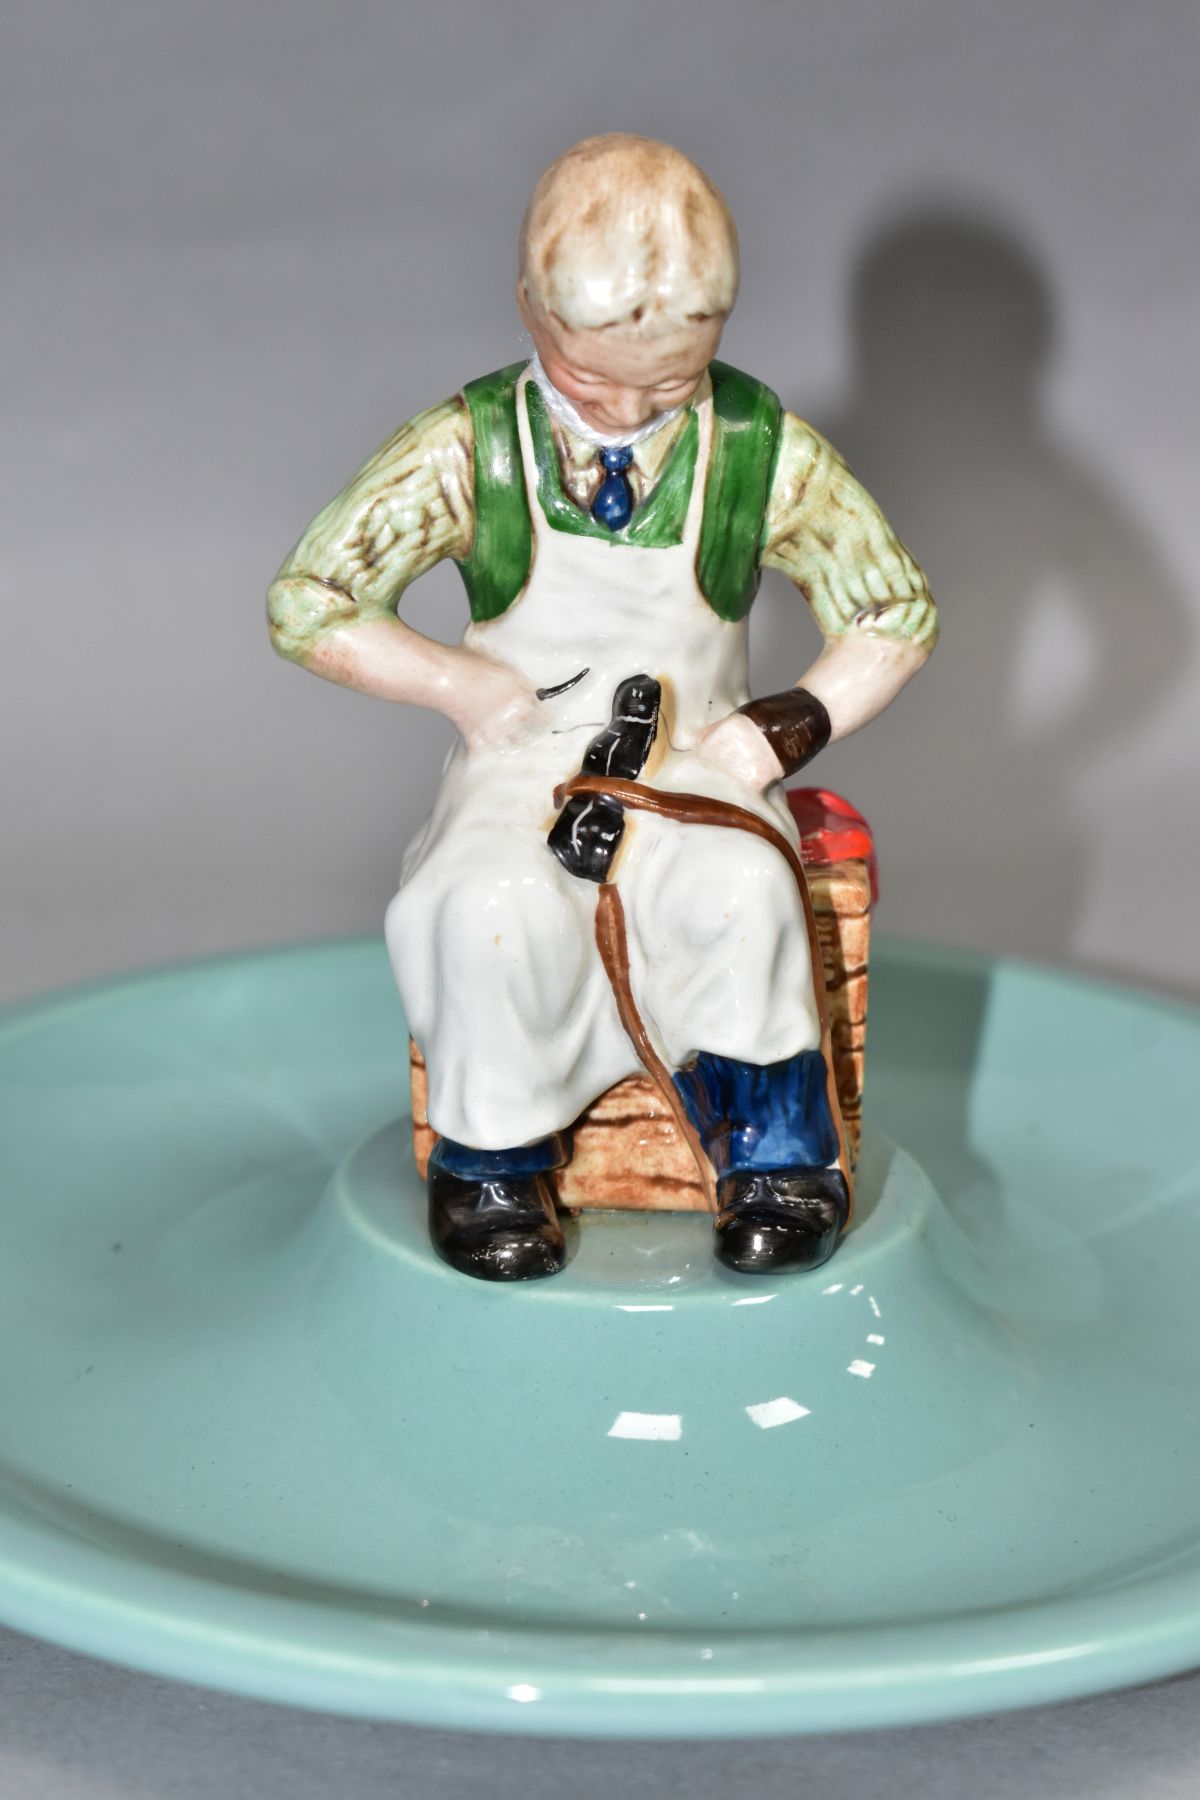 A BESWICK ADVERTISING ASHTRAY, 'Timpson Fine Shoes' 1865-1965, height 12.5cm